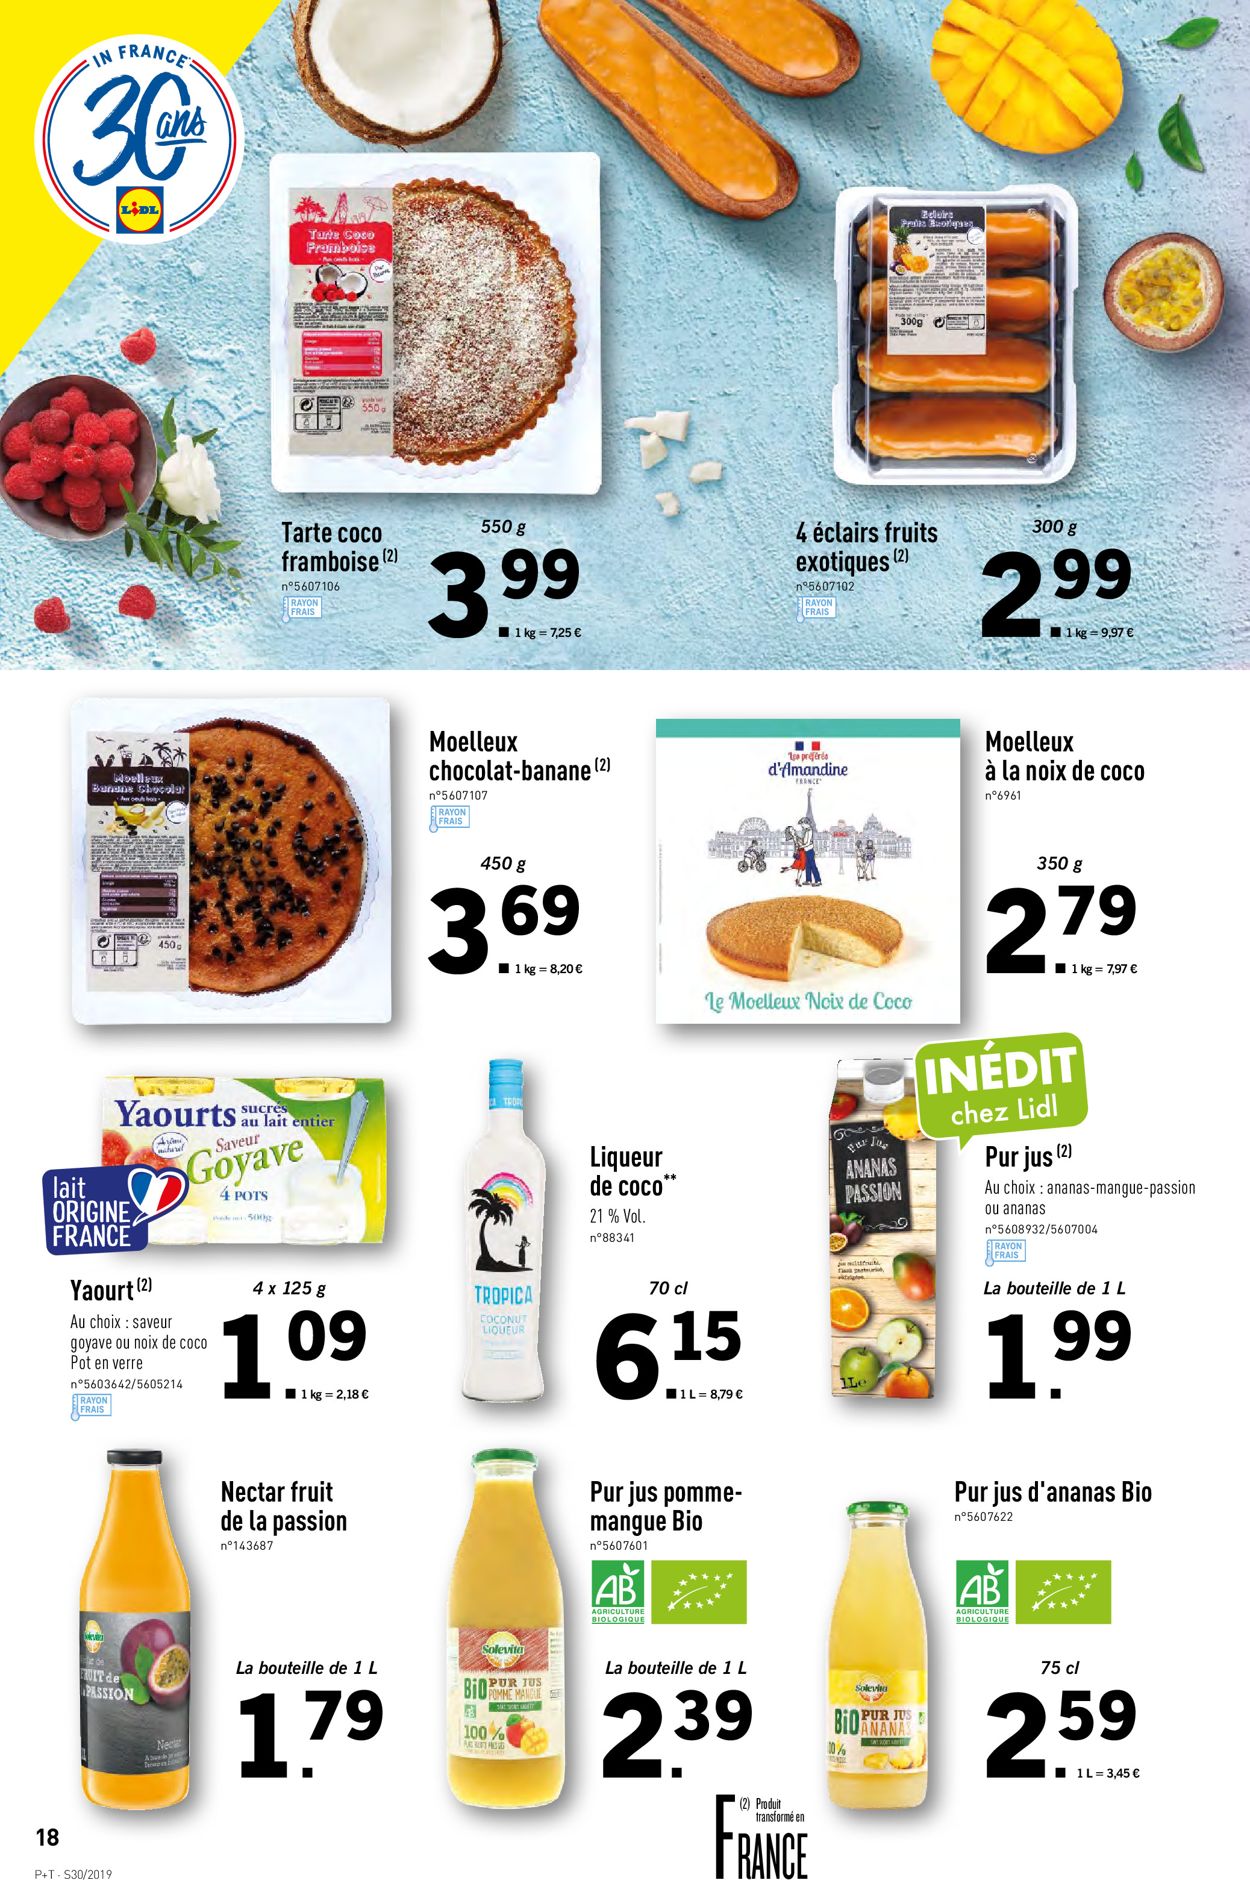 Lidl Catalogue - 24.07-30.07.2019 (Page 18)